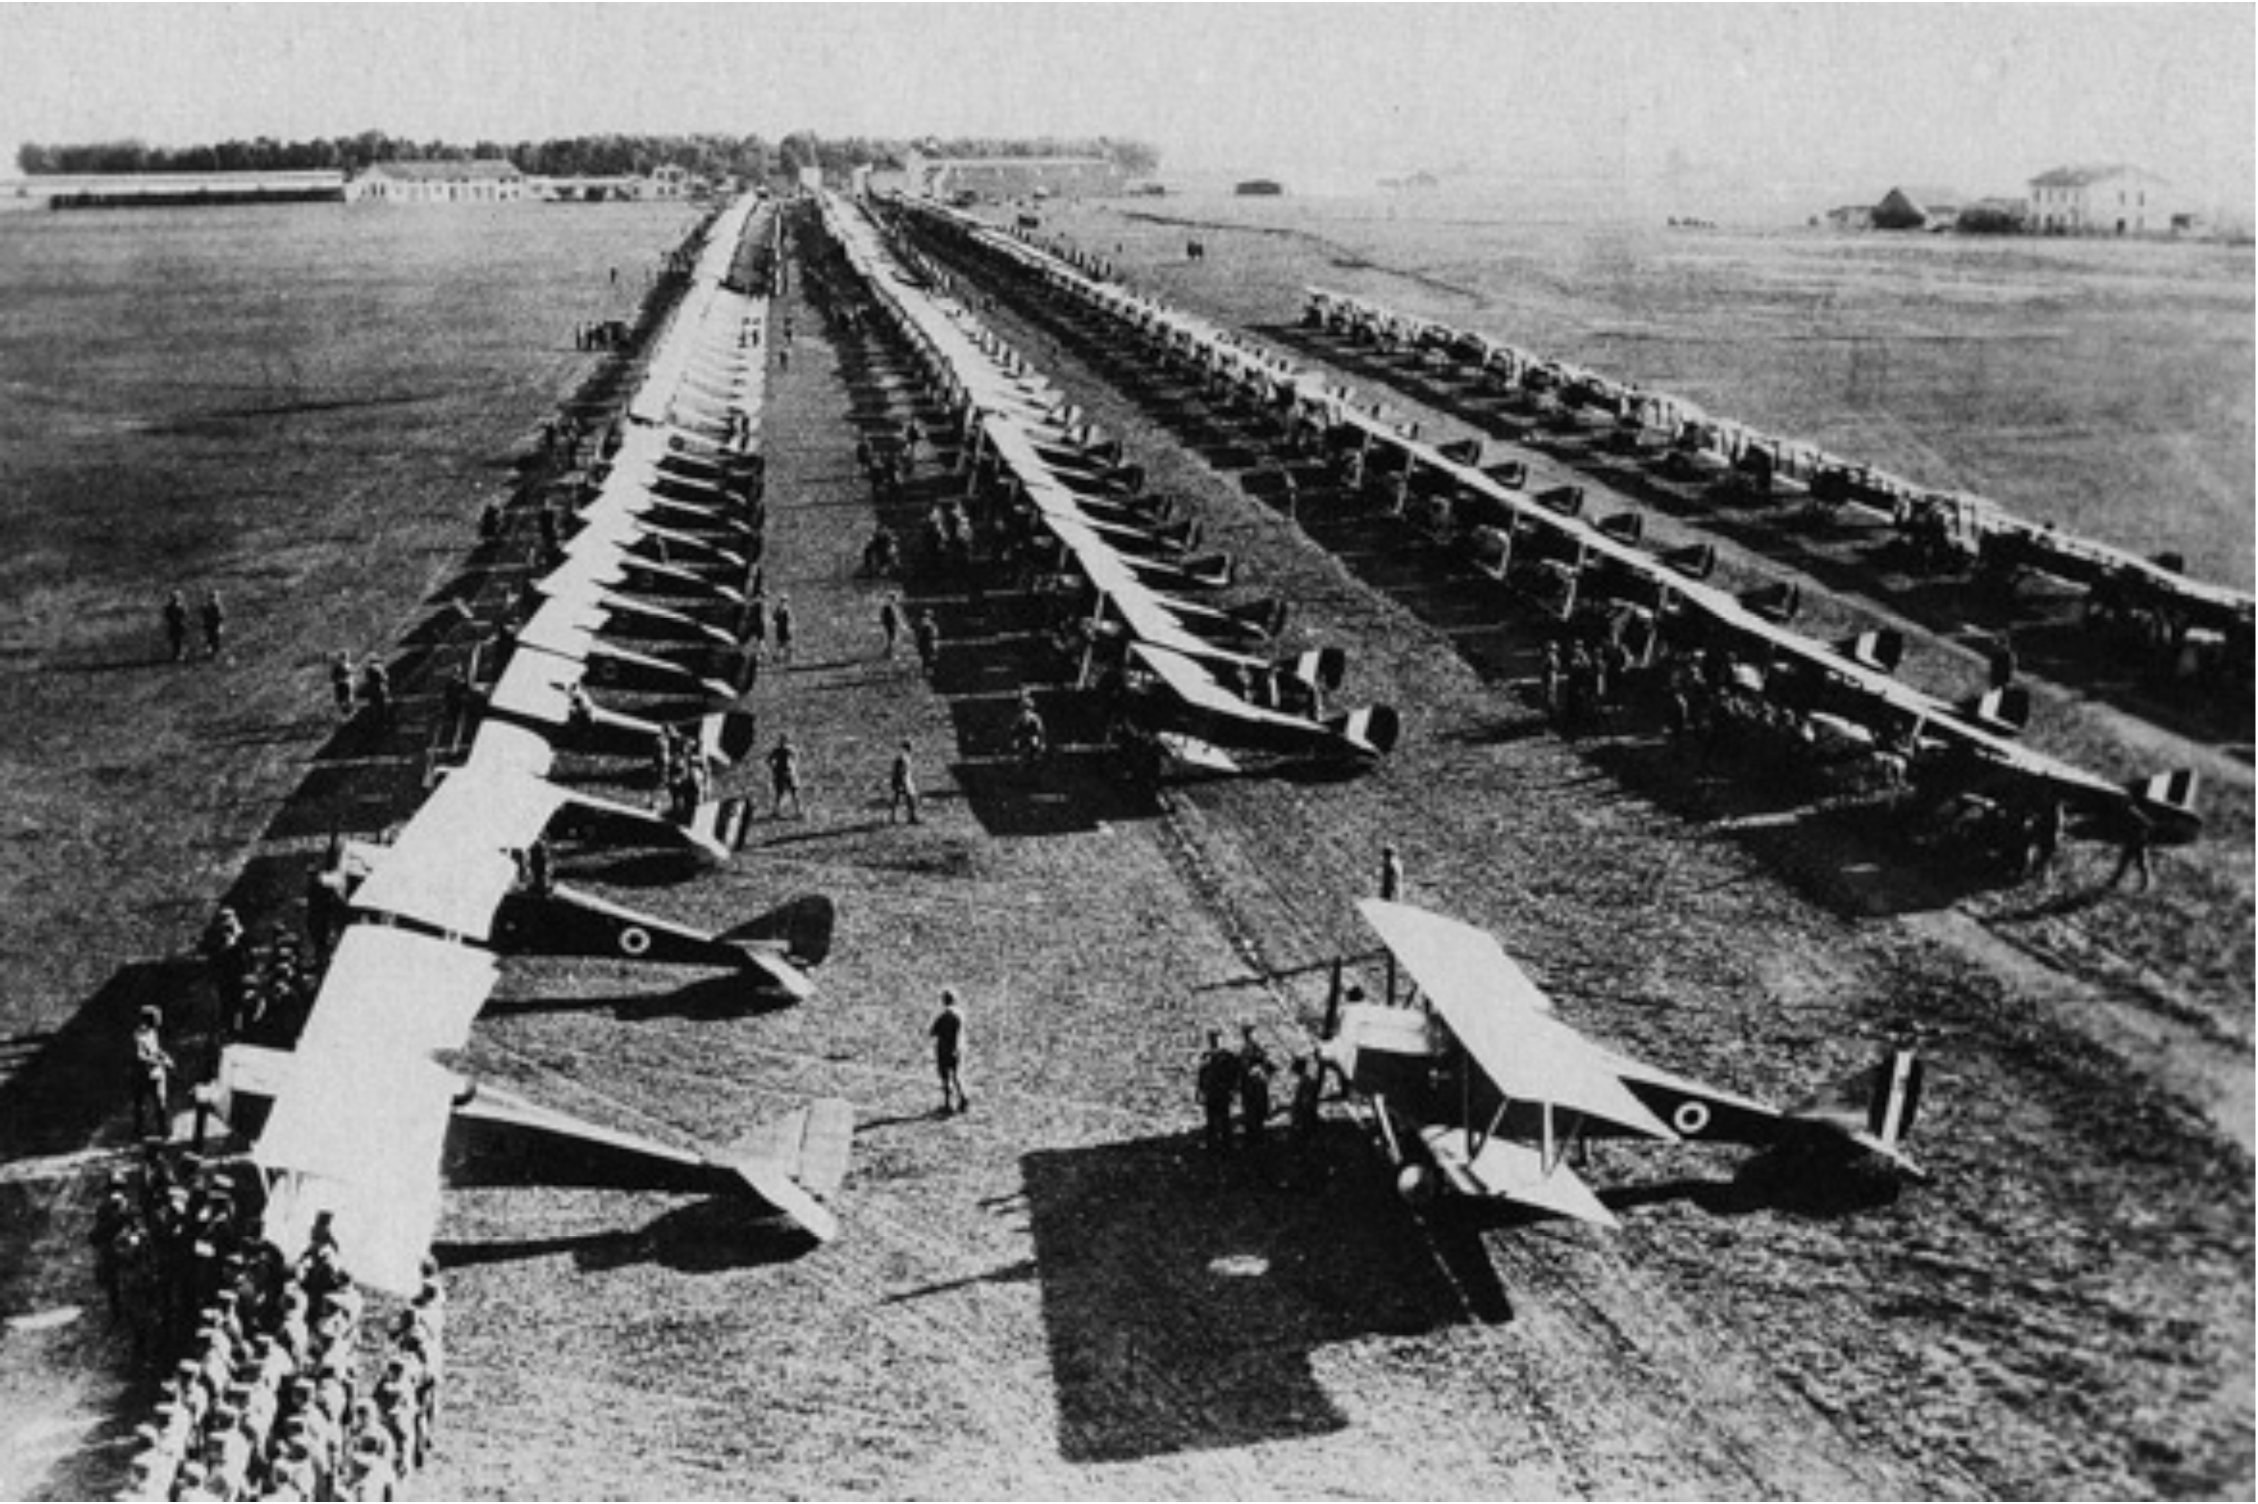 The newly created Regia Aeronautica lined up for review at Rome Centocelle airfield in November 1923 